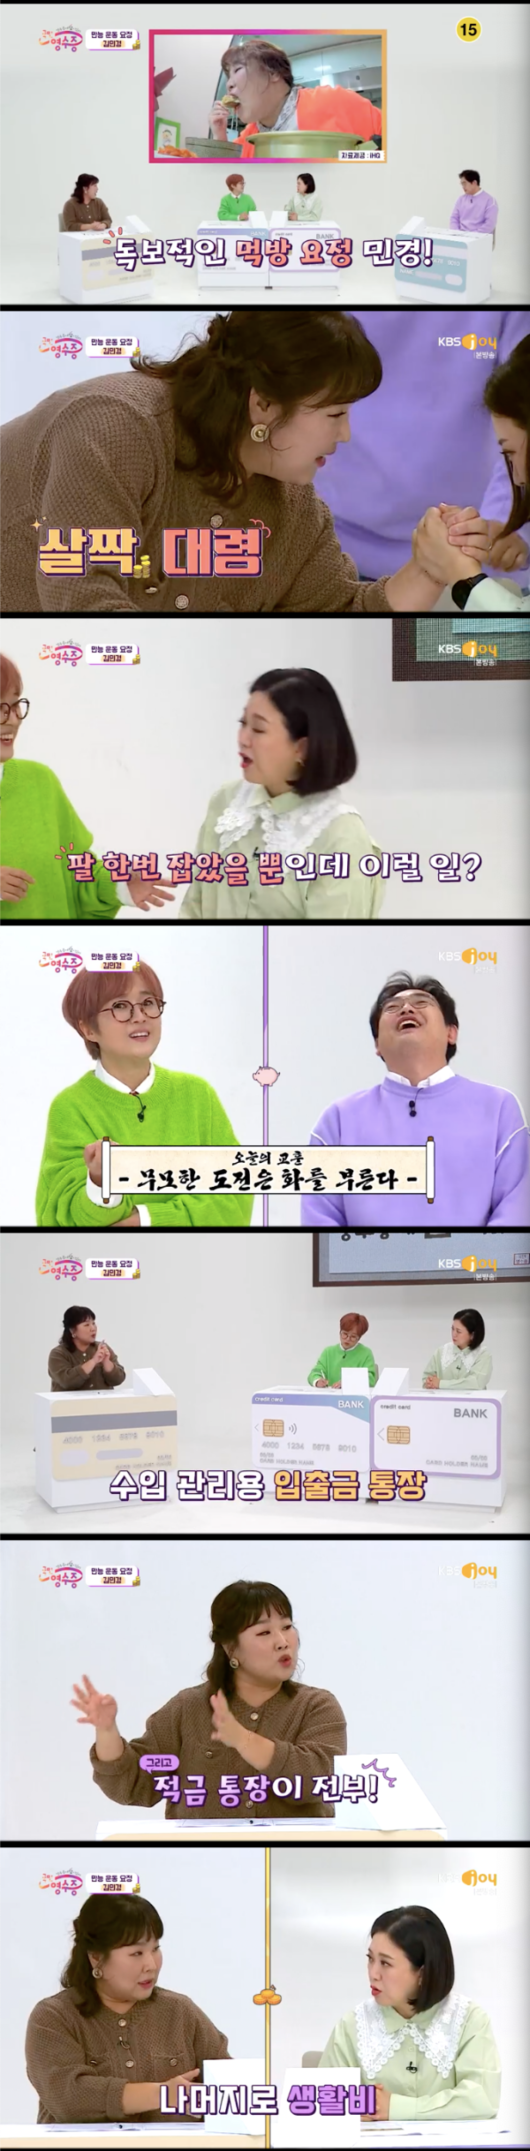 Kim Min-kyung, a national receipt, has revealed that he lives in Gangnam District.Kim Min-kyung appeared as a sympathy fairy in KBS Joy National Receipt broadcasted at 9 pm on the 12th.Kim Sook introduced him as the richest, the muscular rich of the rich, the civil-kyung general who eats well, exercises well, and gags well.Kim Min-kyung said, I meet a lot of young friends when I go out these days. I do not know if I am Gag Woman. I am an athlete and I know that I am an entertainer.Kim Sook had an impromptu arm wrestling match with Kim Min-kyung, who said, Why is my arm?Song Eun-yi also tried to make the top model, shaking all over the body, but it was not enough.What it felt like to be hanging on the wall alone, Song Eun-yi explained.Finally, Young Jin Park was the Top Model; Kim Min-kyung also handed over Young Jin Park smoothly.Young Jin Park said, I have to go to the end. He said, I have to recover my honor, so I can not confront you again.Song Eun-yi said, I am 50 days tomorrow, but should I win me?Young Jin Park said, Kim Min-kyung has emerged as an advertising blue chip. I think he made some money, but how are you managing money?Kim Min-kyung said, I am famous for not managing money. I dont know how to manage it. I have two bankbooks, one for deposit and withdrawal, and one for savings.Kim Sook surprised, saying, Are you just leaving it?Kim Min-kyung said, If you earn ten thousand won, you save 600-700 and spend four million won on living expenses. You dont spend on eating rather than thinking.I like to give people a gift, so I get a lot of money. The goal is to set up a house in Kim Min-kyung, Seoul, a 14-year Gag Woman.Kim Sook reported that Kim Min-kyung is now living in Gangnam District.Kim Min-kyung said, I cant live far because I have a lot of work. I took out a loan and moved to Gangnam District.I loved it hard.Kim Min-kyung said, It is a little scary to buy a house without knowing anything.Kim Sook said, I dont know if it will be comforting, but Song Eun-yi, who is 29 years old, has no home in Seoul. Song Eun-yi replied, I did it and sold it.Kim Sook laughed when he said, I bought it at the high point and sold it at the low point.KBS Joy National Receipt broadcast screen capture